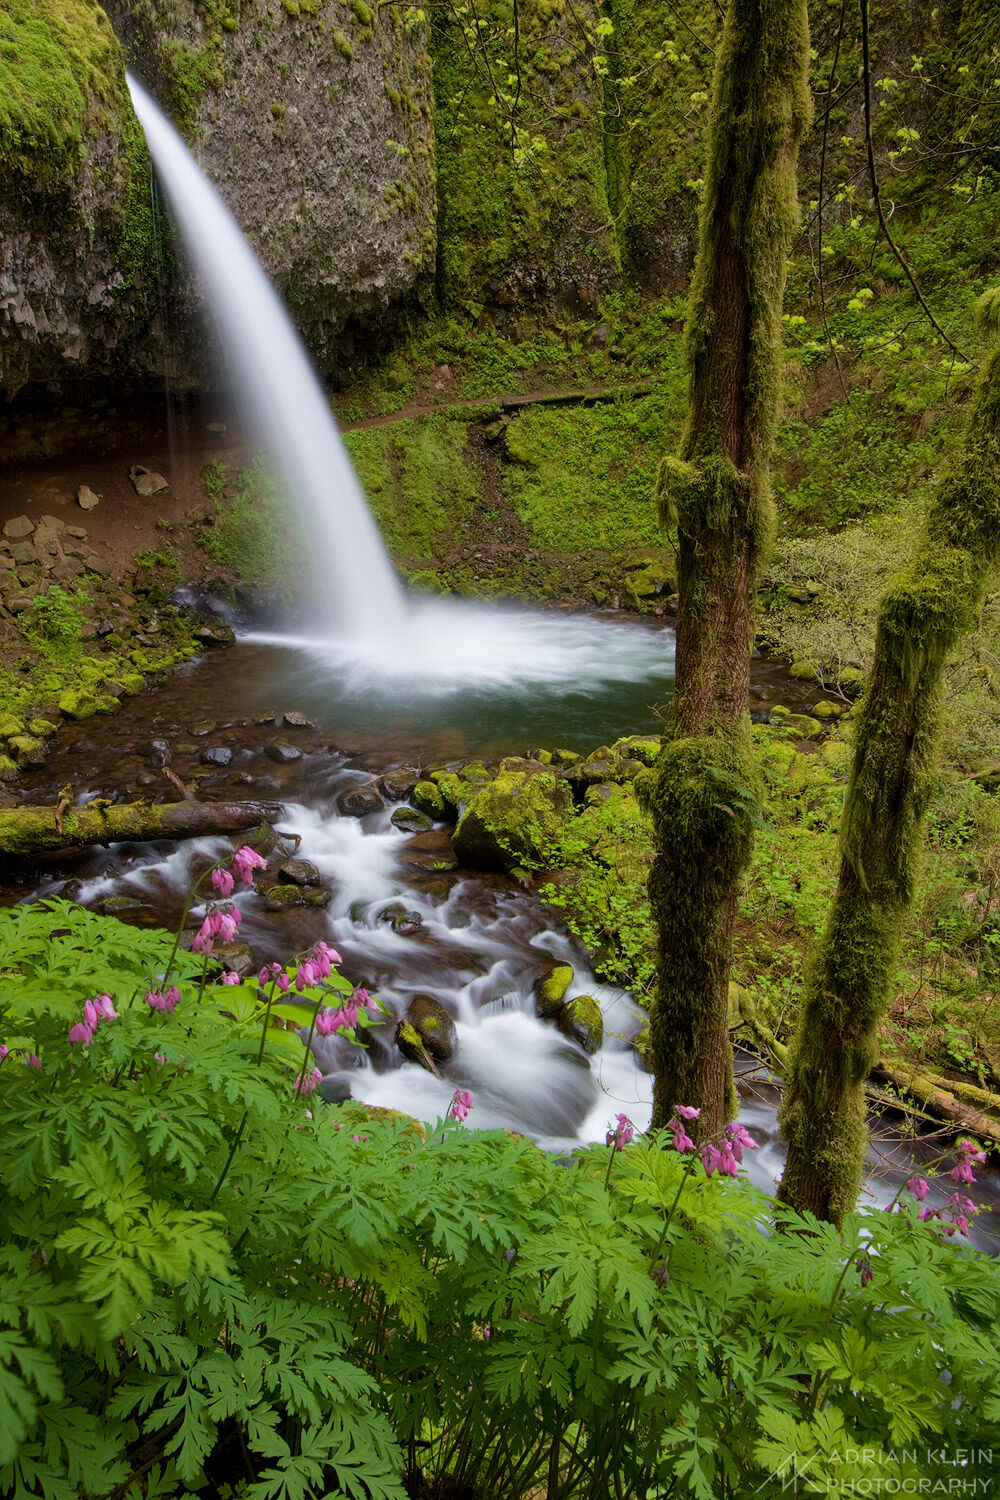 Ponytail Falls in the Columbia River Gorge, Oregon during spring season with pink bleeding hearts in bloom.